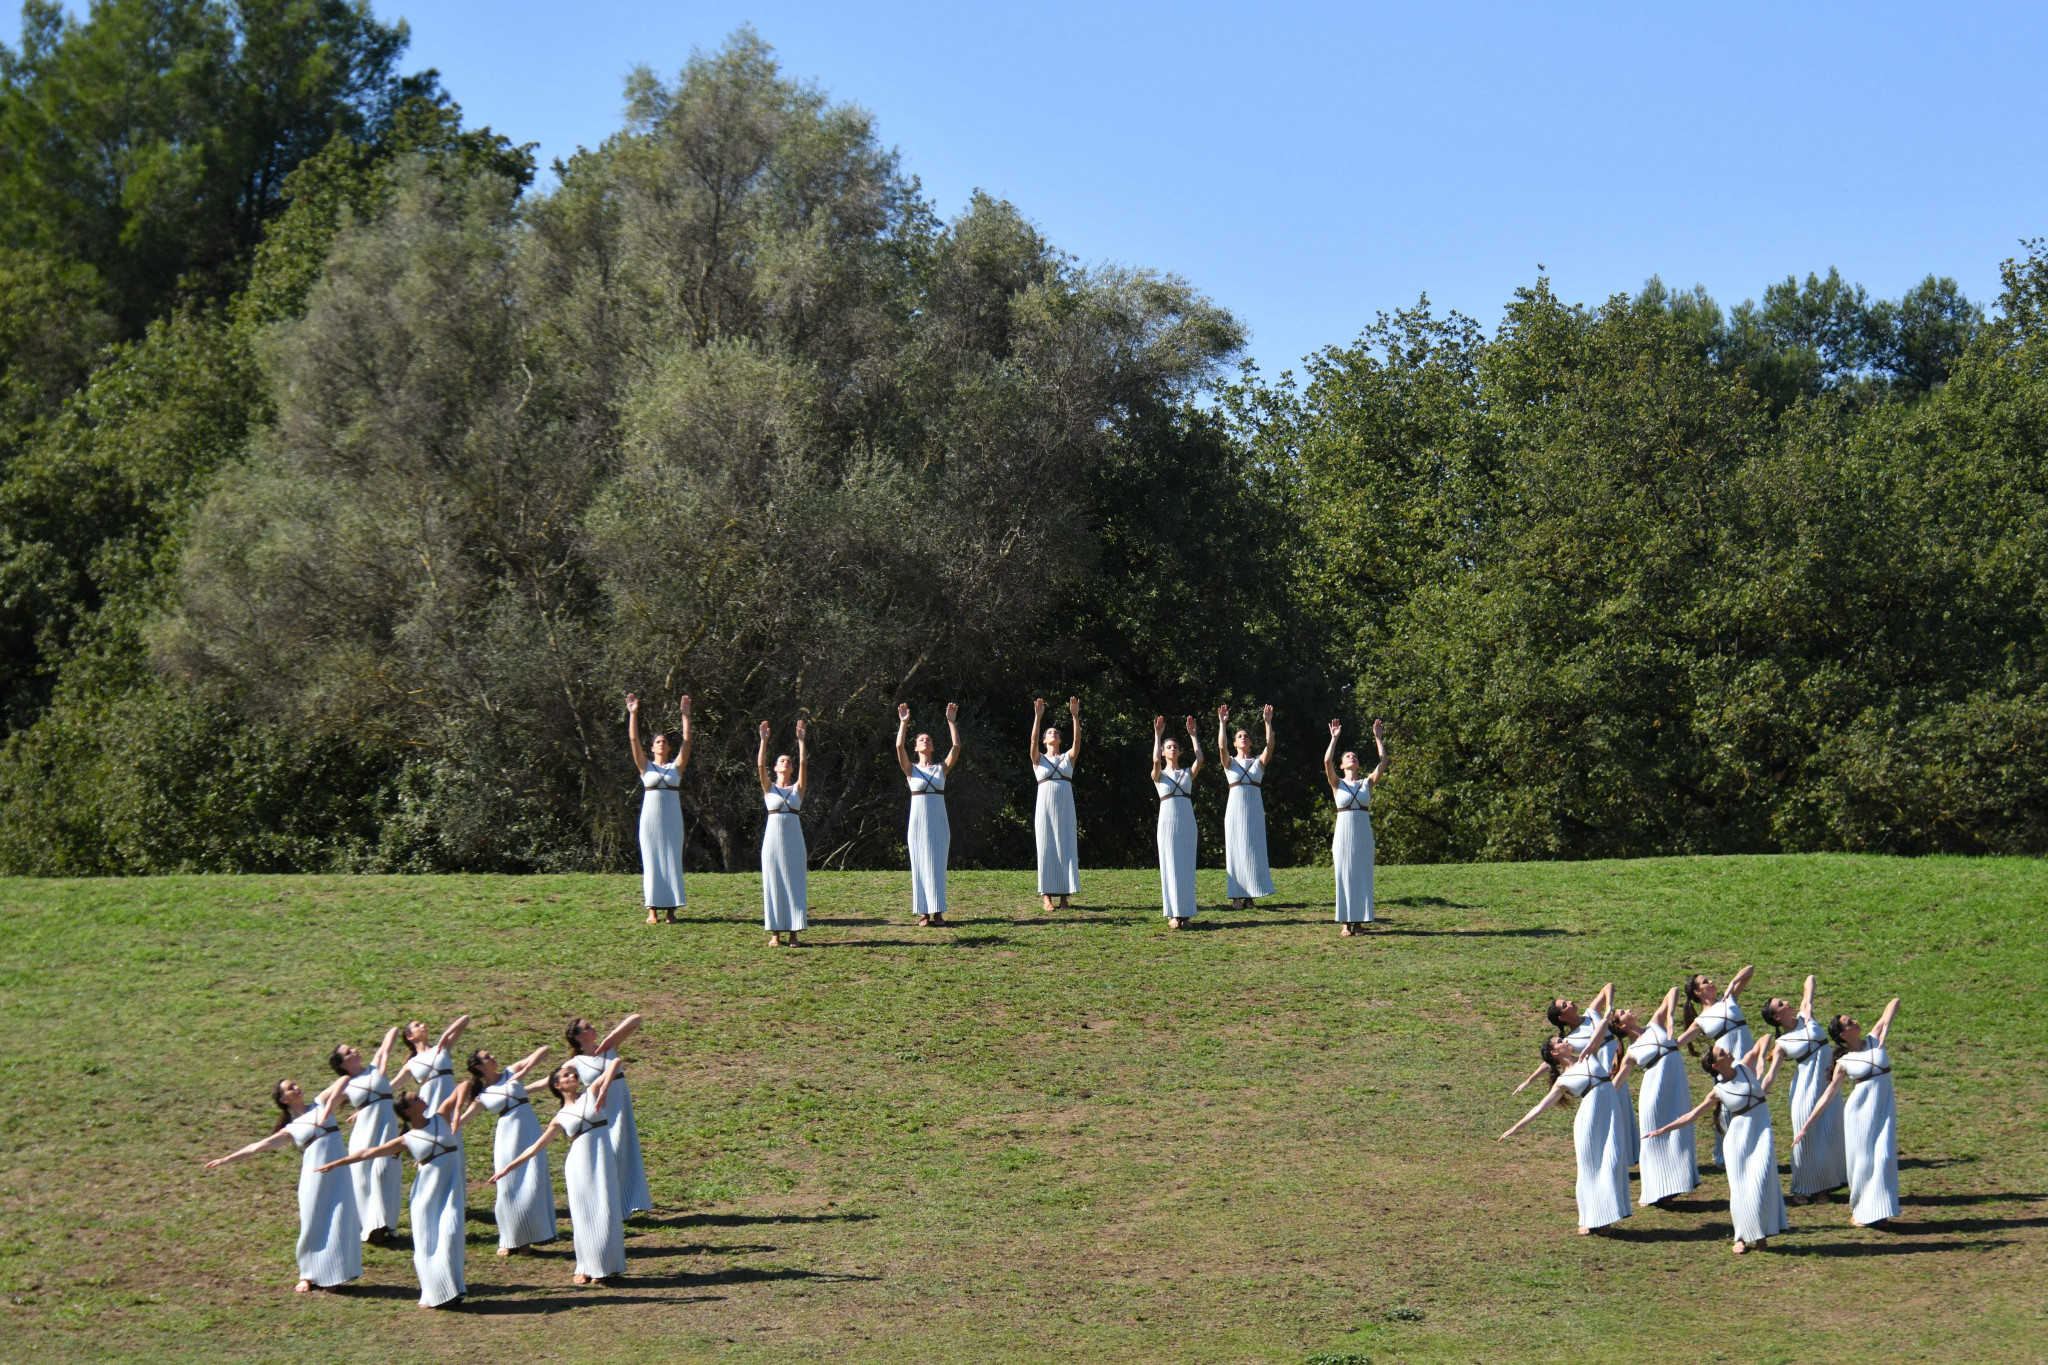 Actresses playing the role of Priestesses dance during the Flame Lighting Ceremony in Ancient Olympia ©Getty Images 